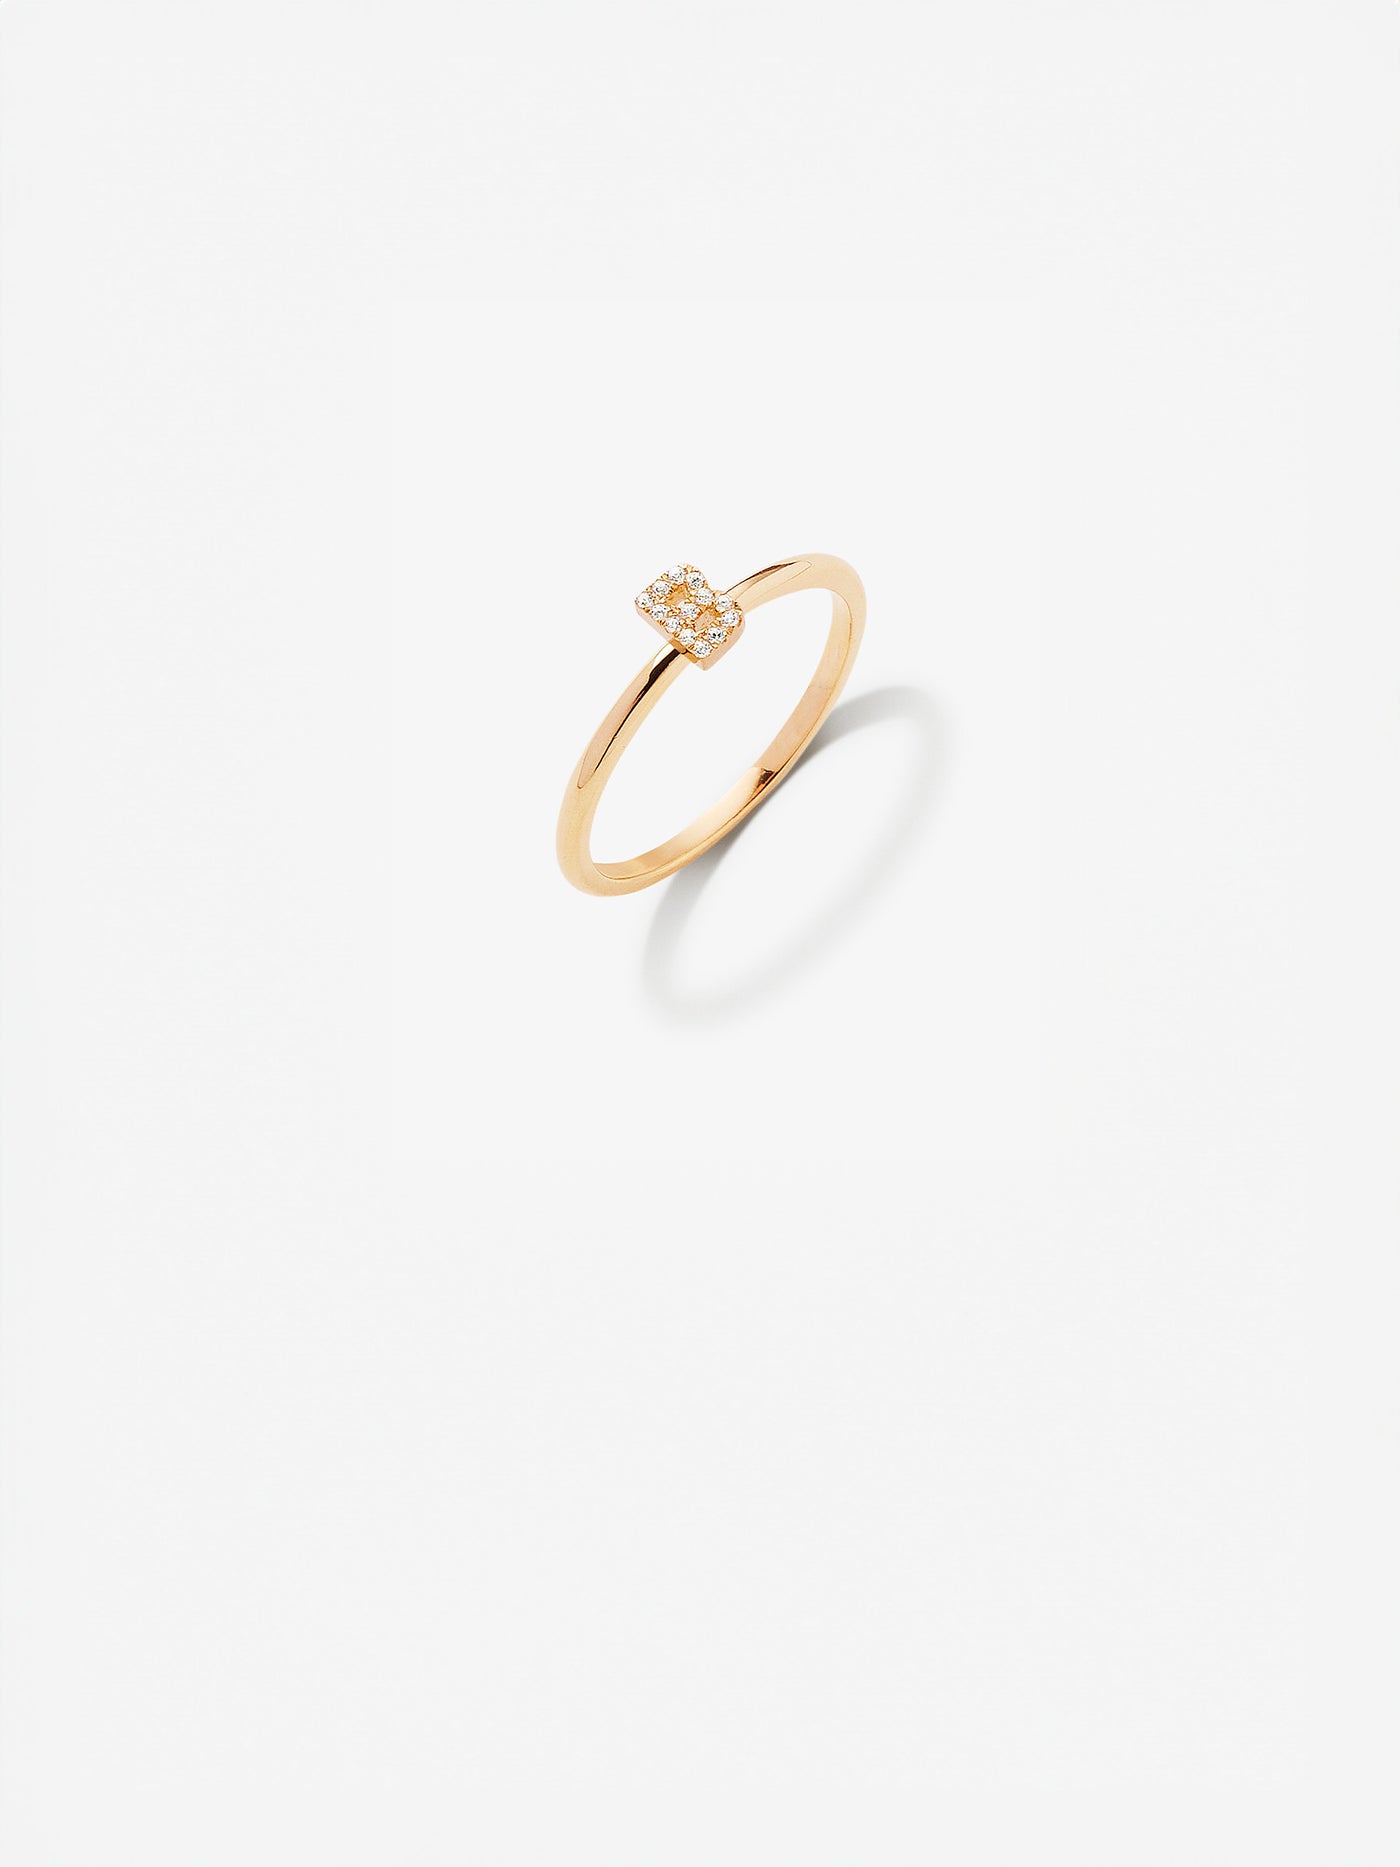 Letter B Ring in Diamonds and 18k Gold